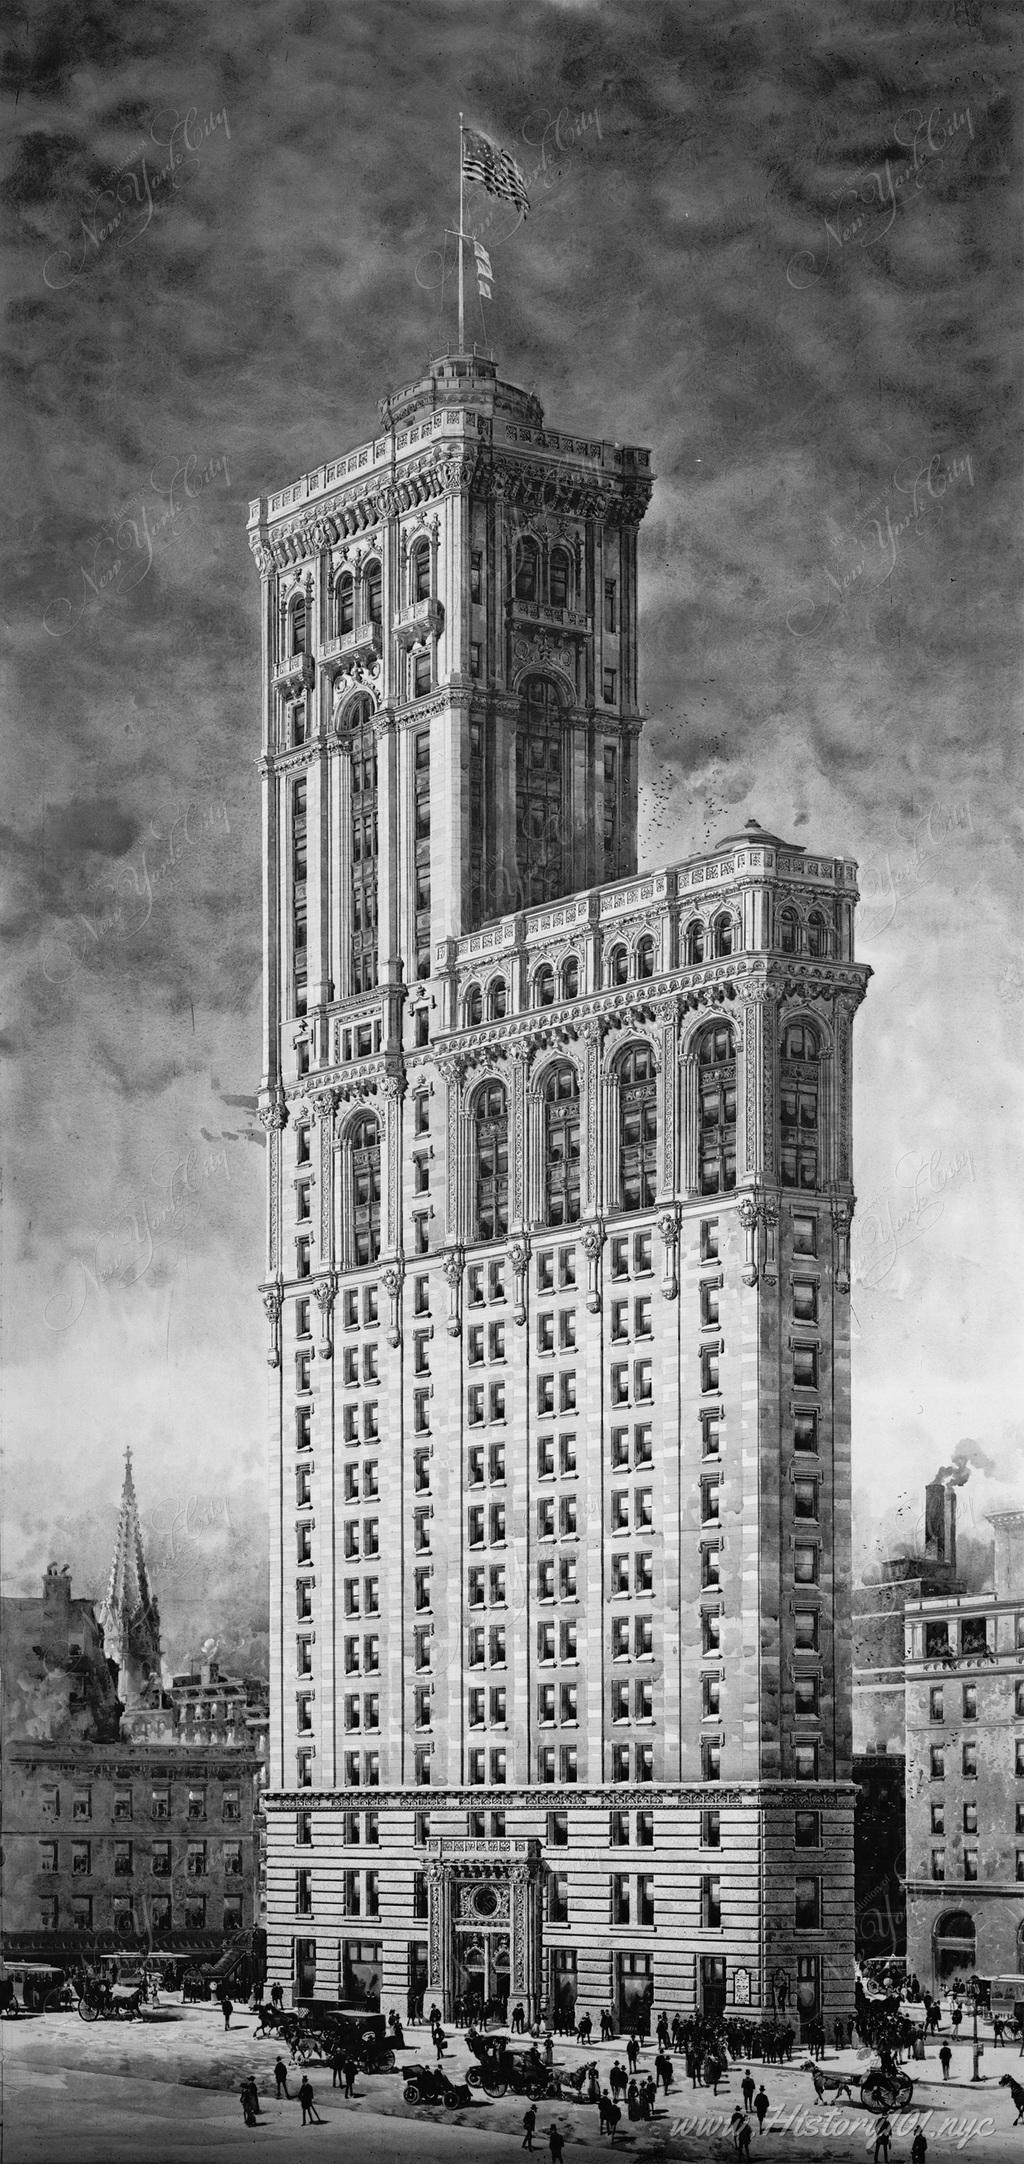 Photograph of the New York Times Building. Though construction was complete, the New York Times would not officially take residence there until 1905.